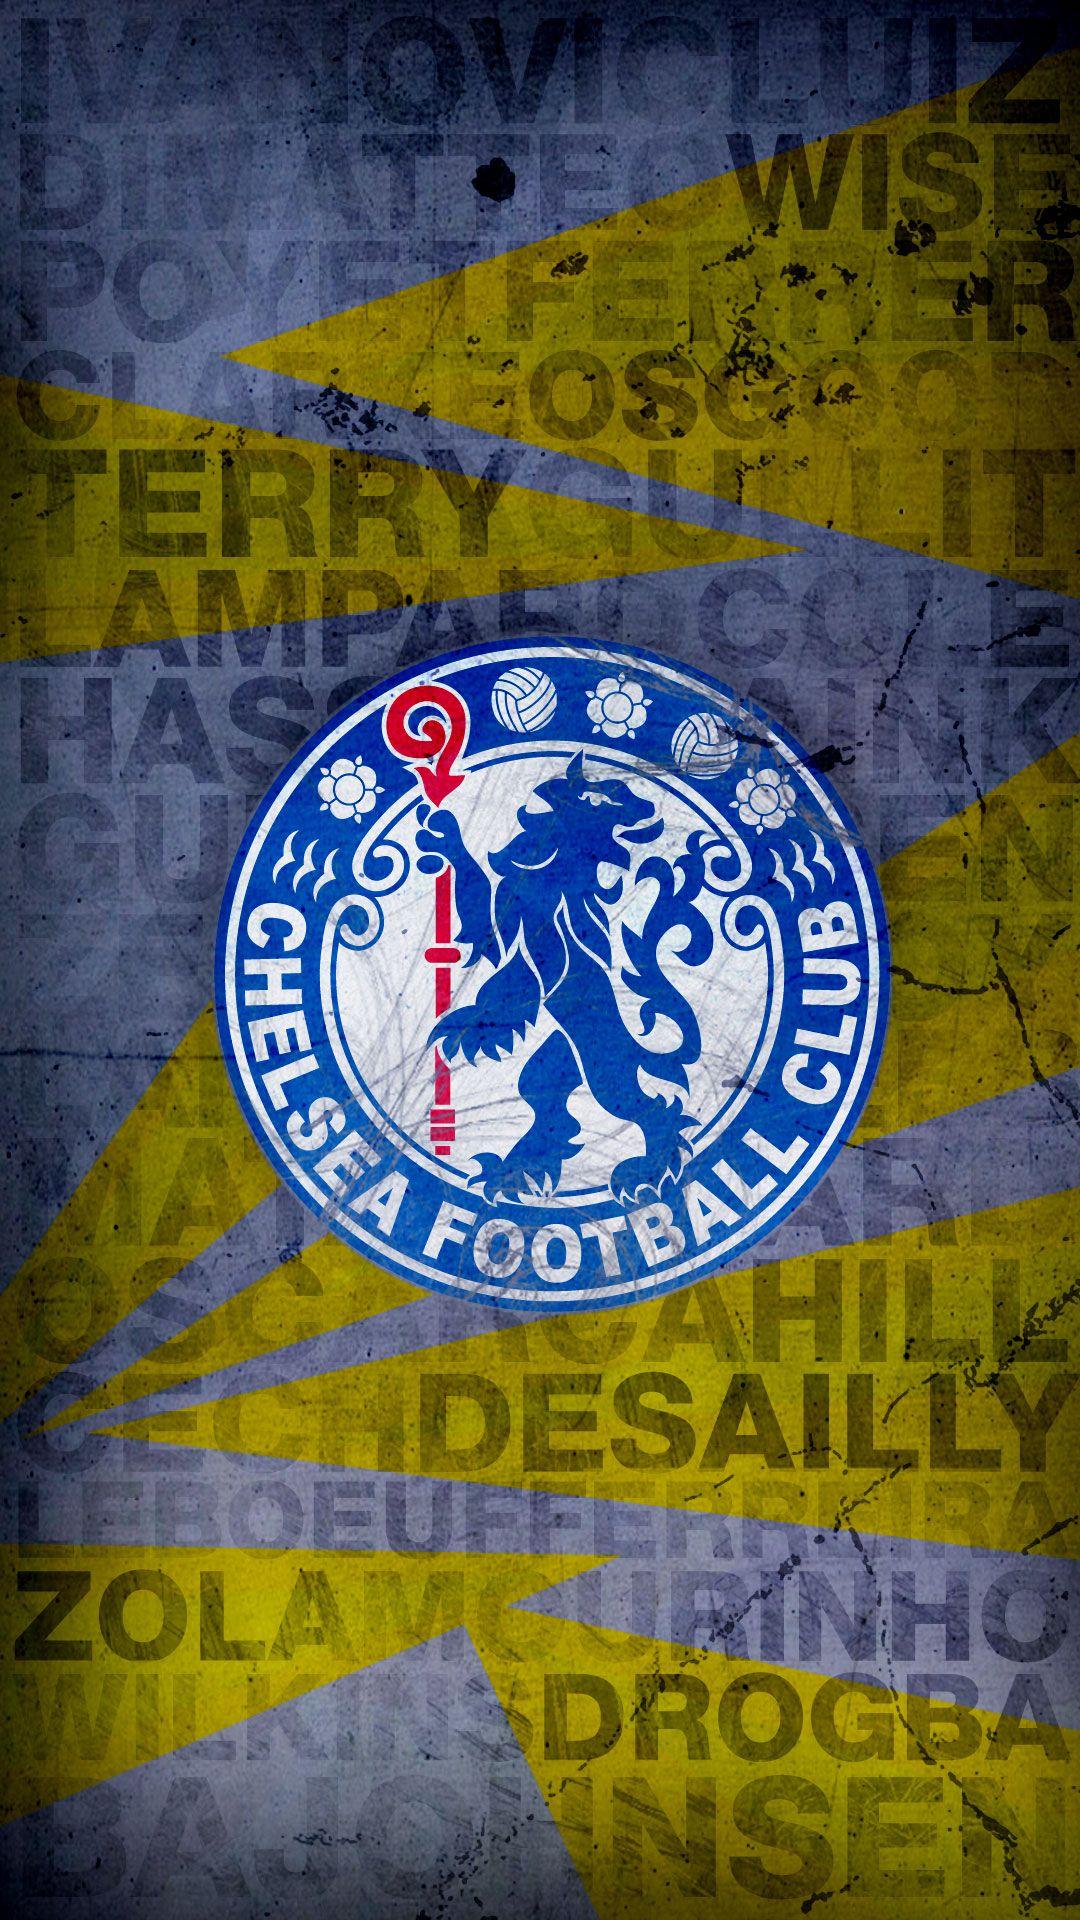 Chelsea Third Kit wallpaper by FF471  Download on ZEDGE  c079